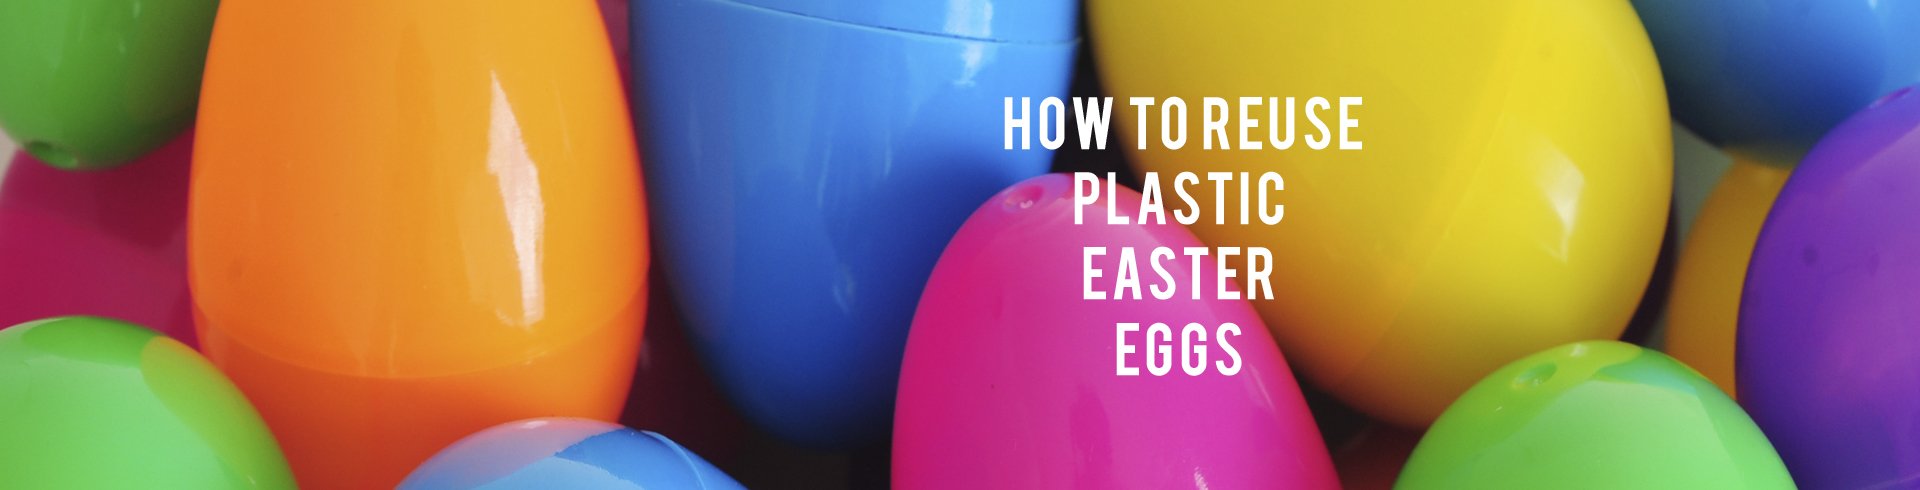 How To Reuse Plastic Easter Eggs Rc Willey Blog